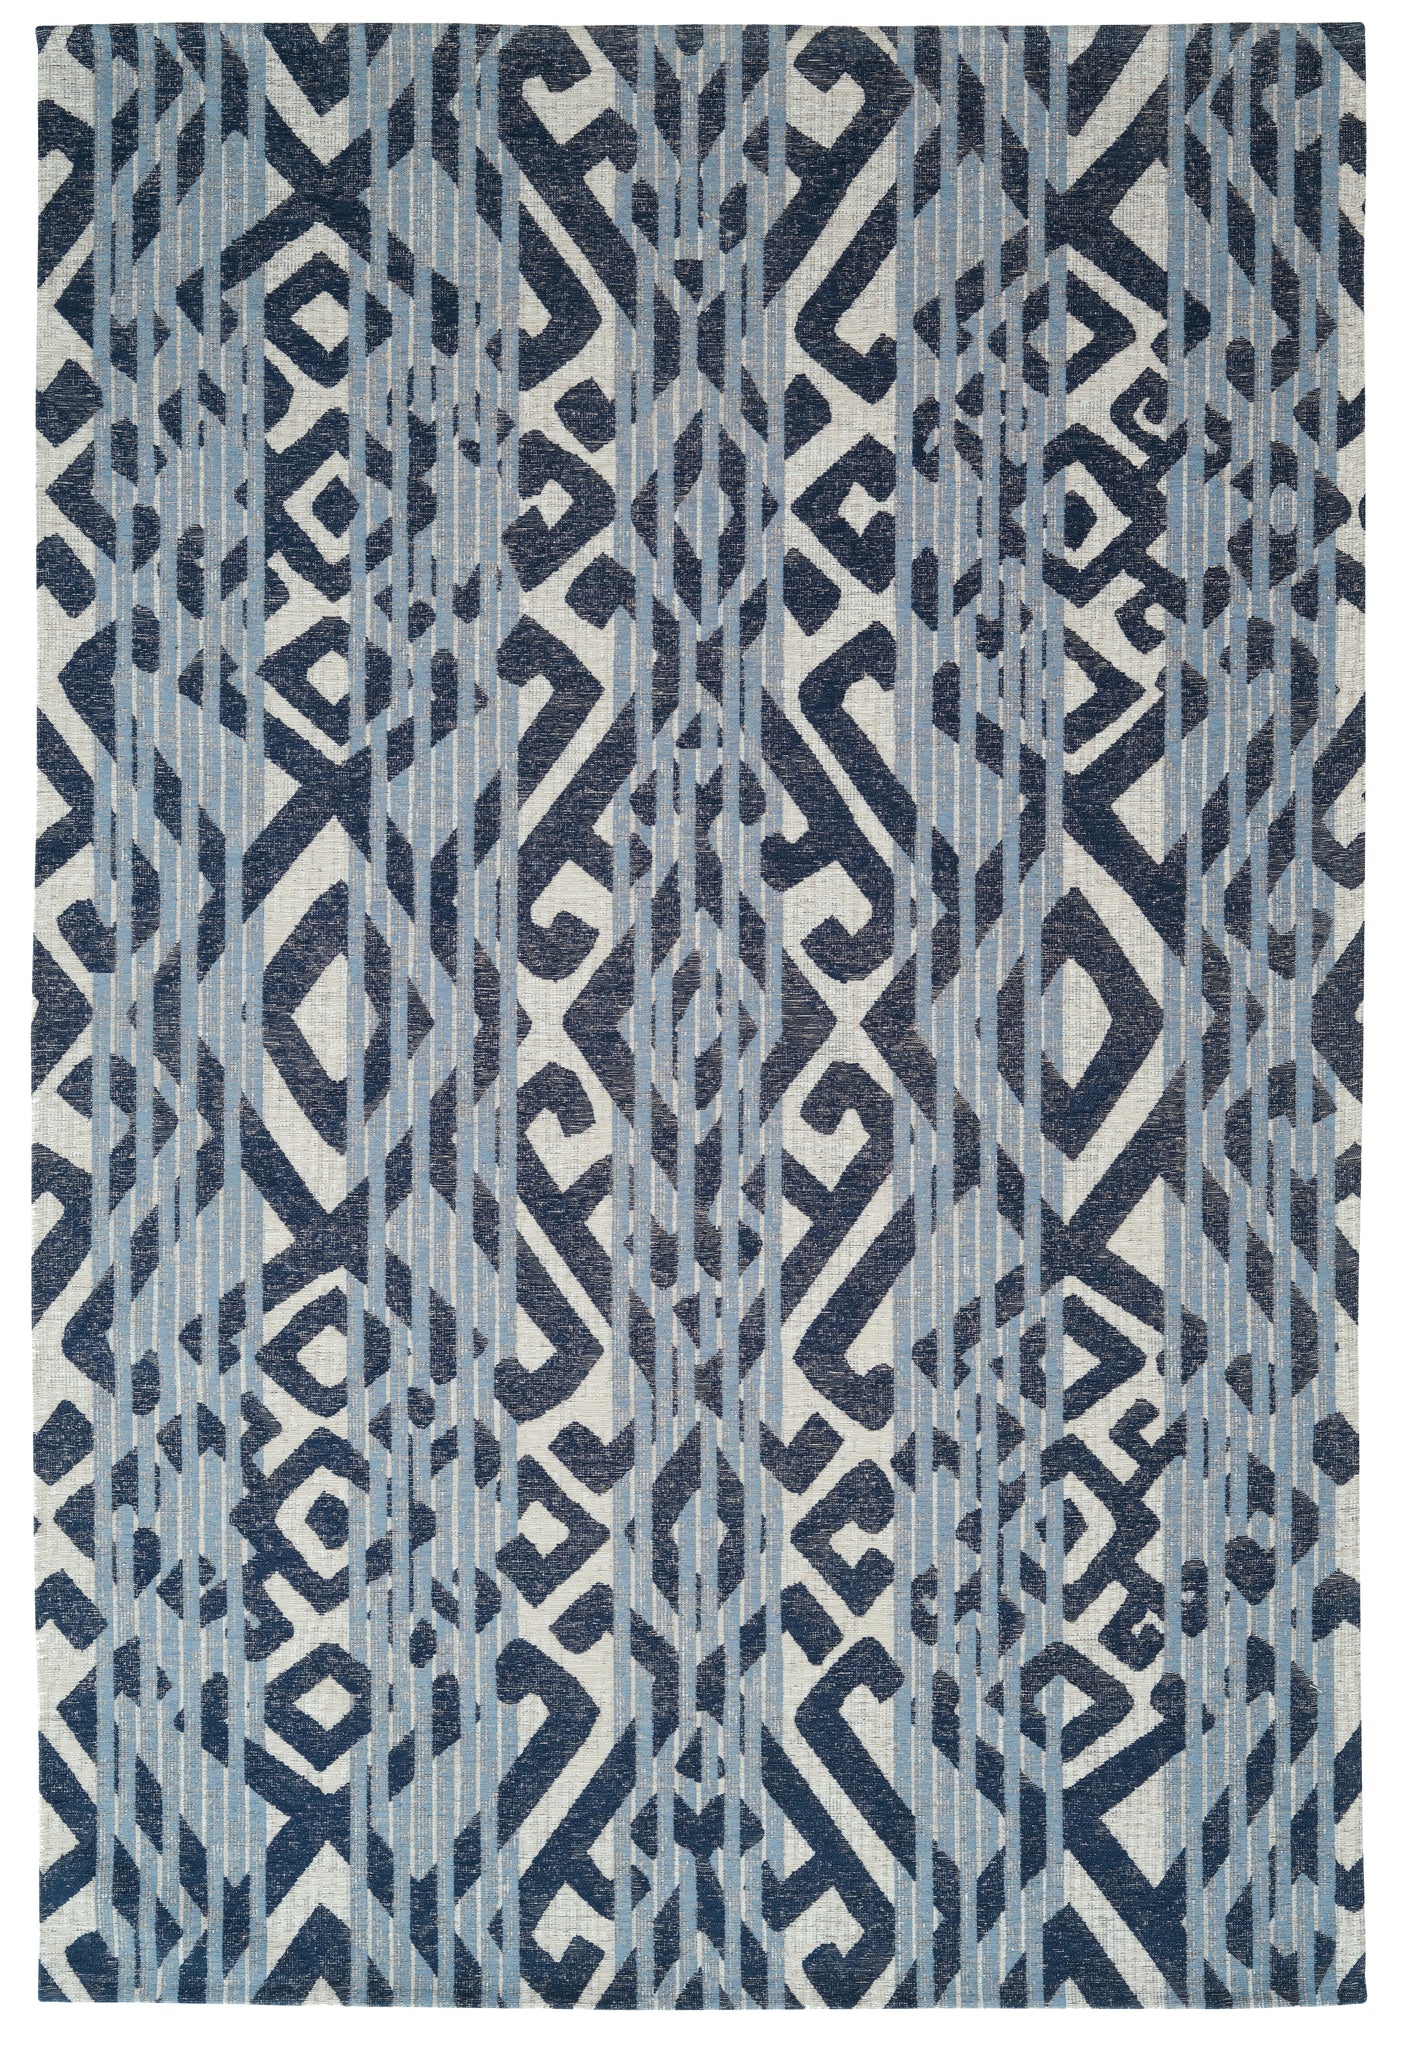 Washable Area rug | The Jacquard Greta | Light Blue & Navy | 8x10 | By MotherRuggers.com | Machine Washable | Jacquard Woven | Pet Friendly | Kid Friendly | Machine Wash | Line Dry | Living Room | Kitchen | Bedroom | High-Traffic | Anti-Slip | Three-year warranty with proper care | Shake or light Vacuum | Machine Wash as needed | Dry Flat or Line Dry | Dries fast